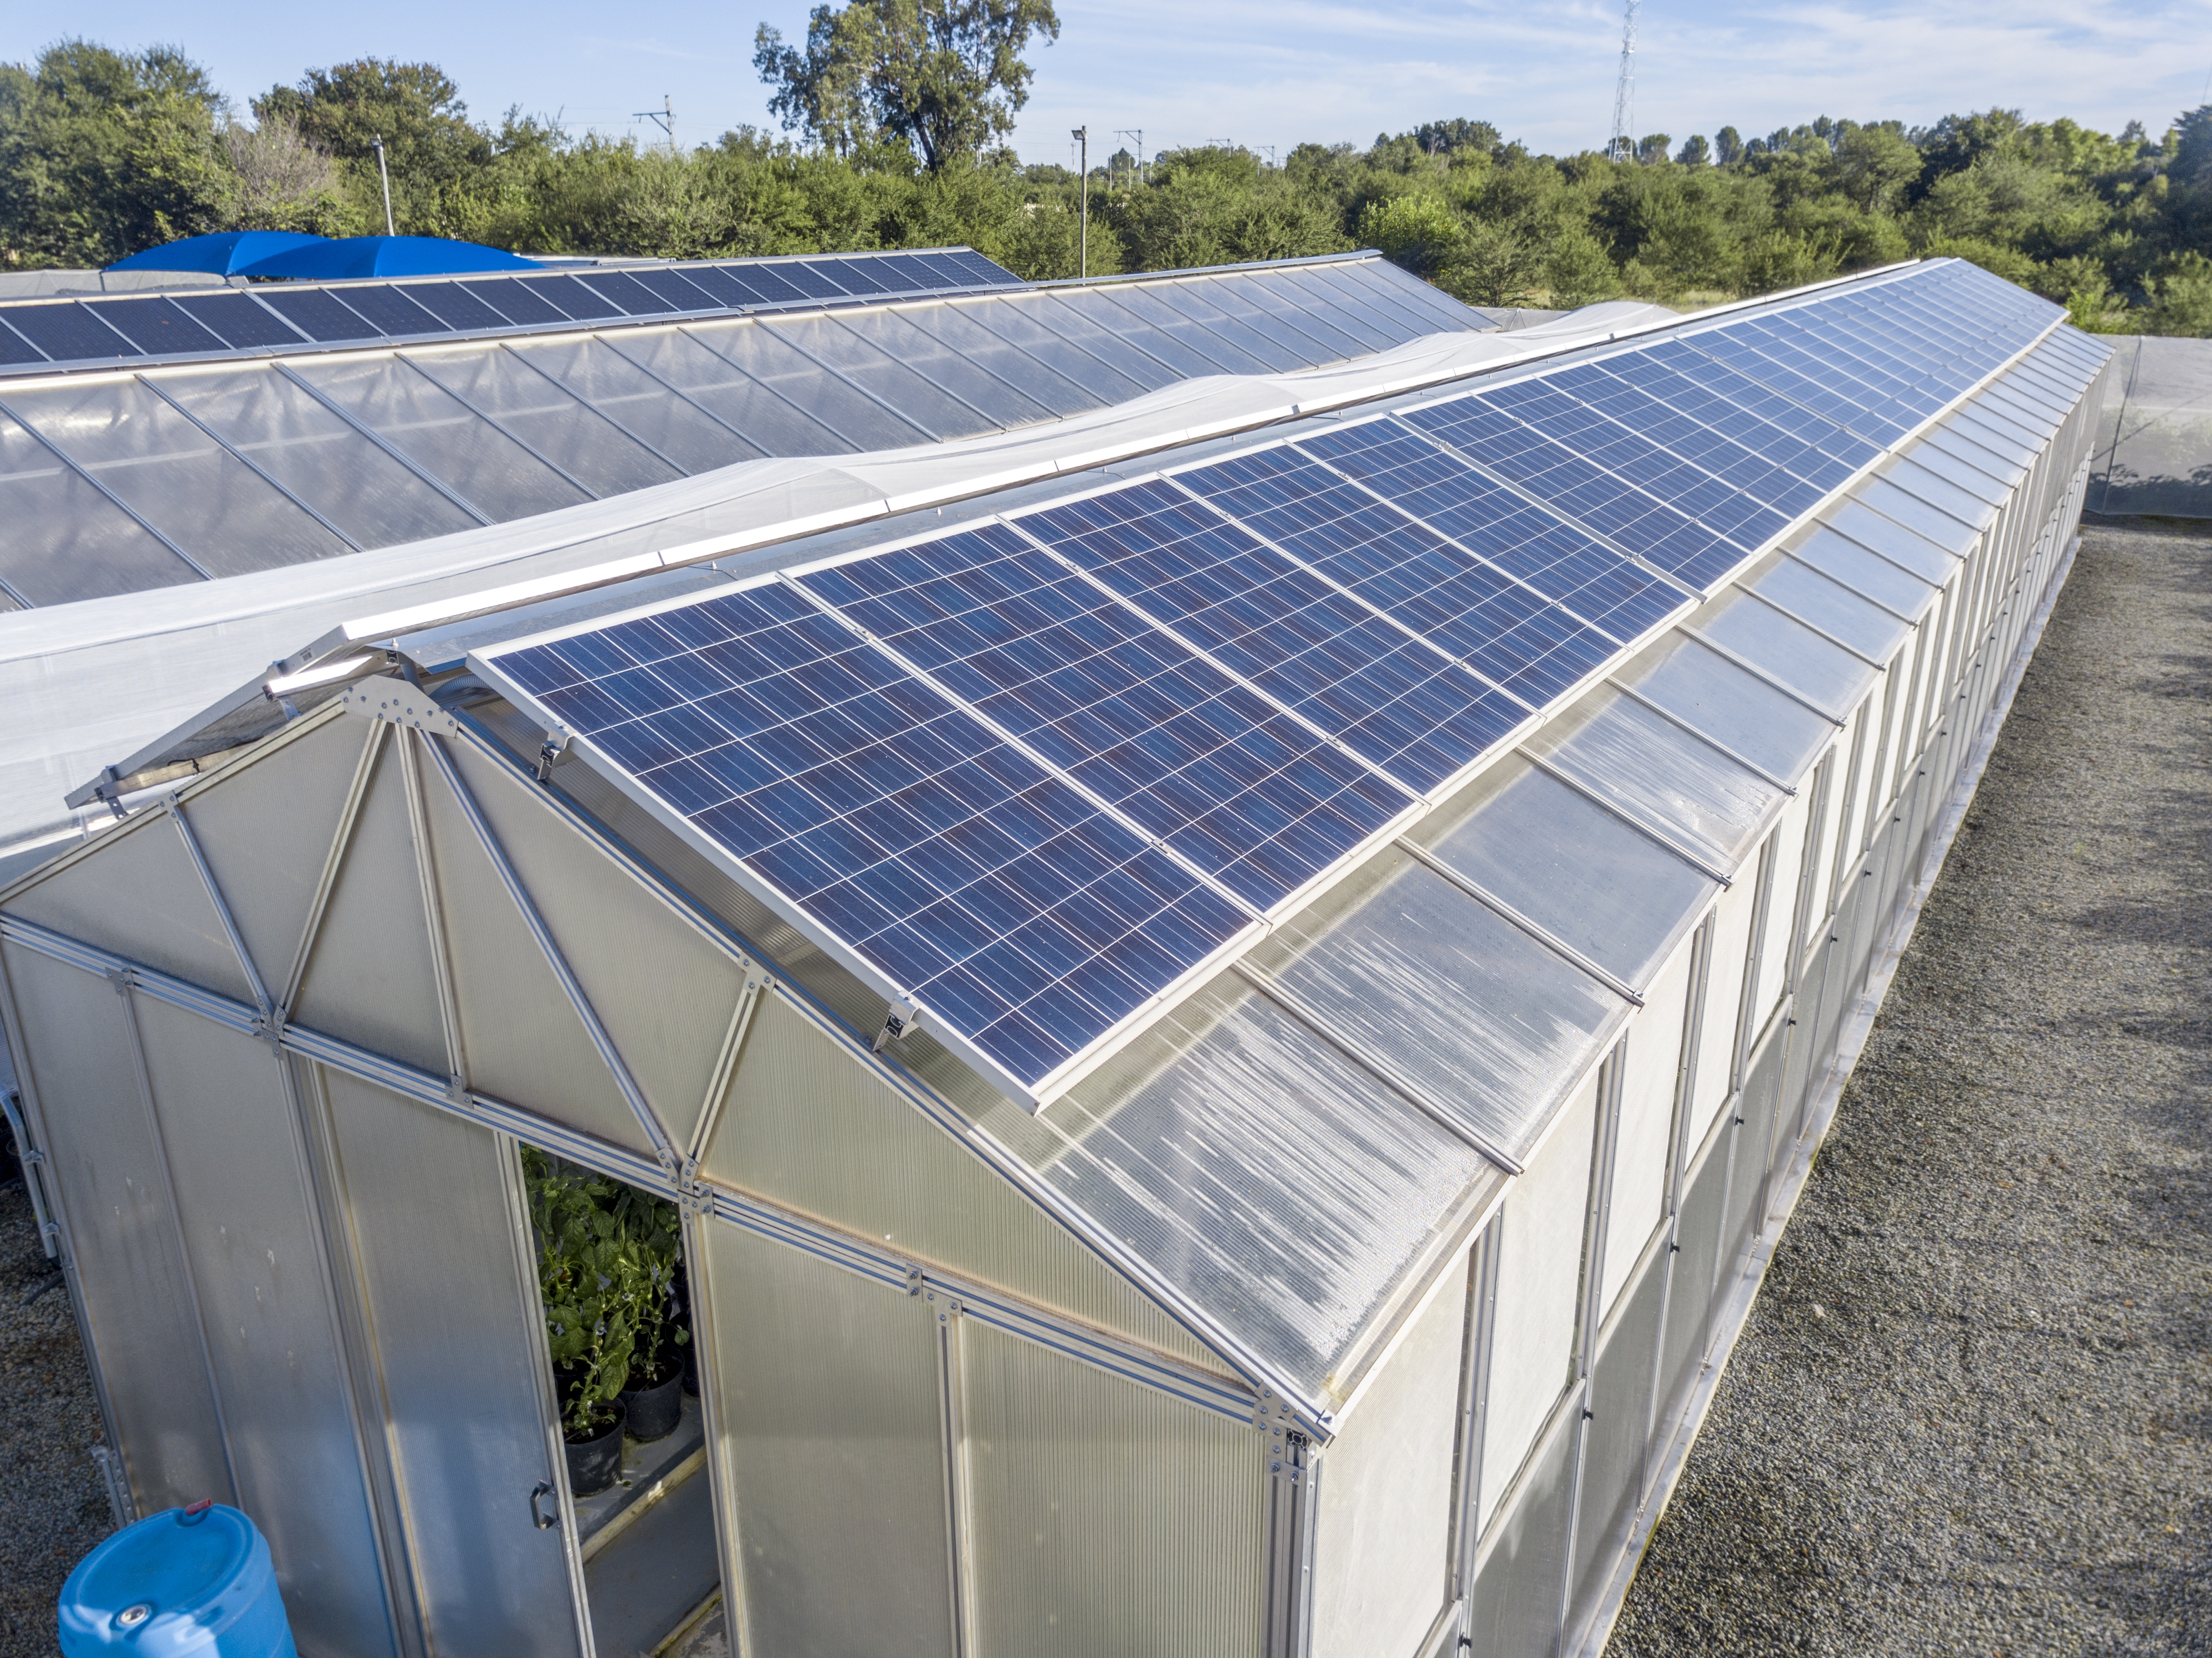 PV-supported greenhouse. © Sunfarming GmbH